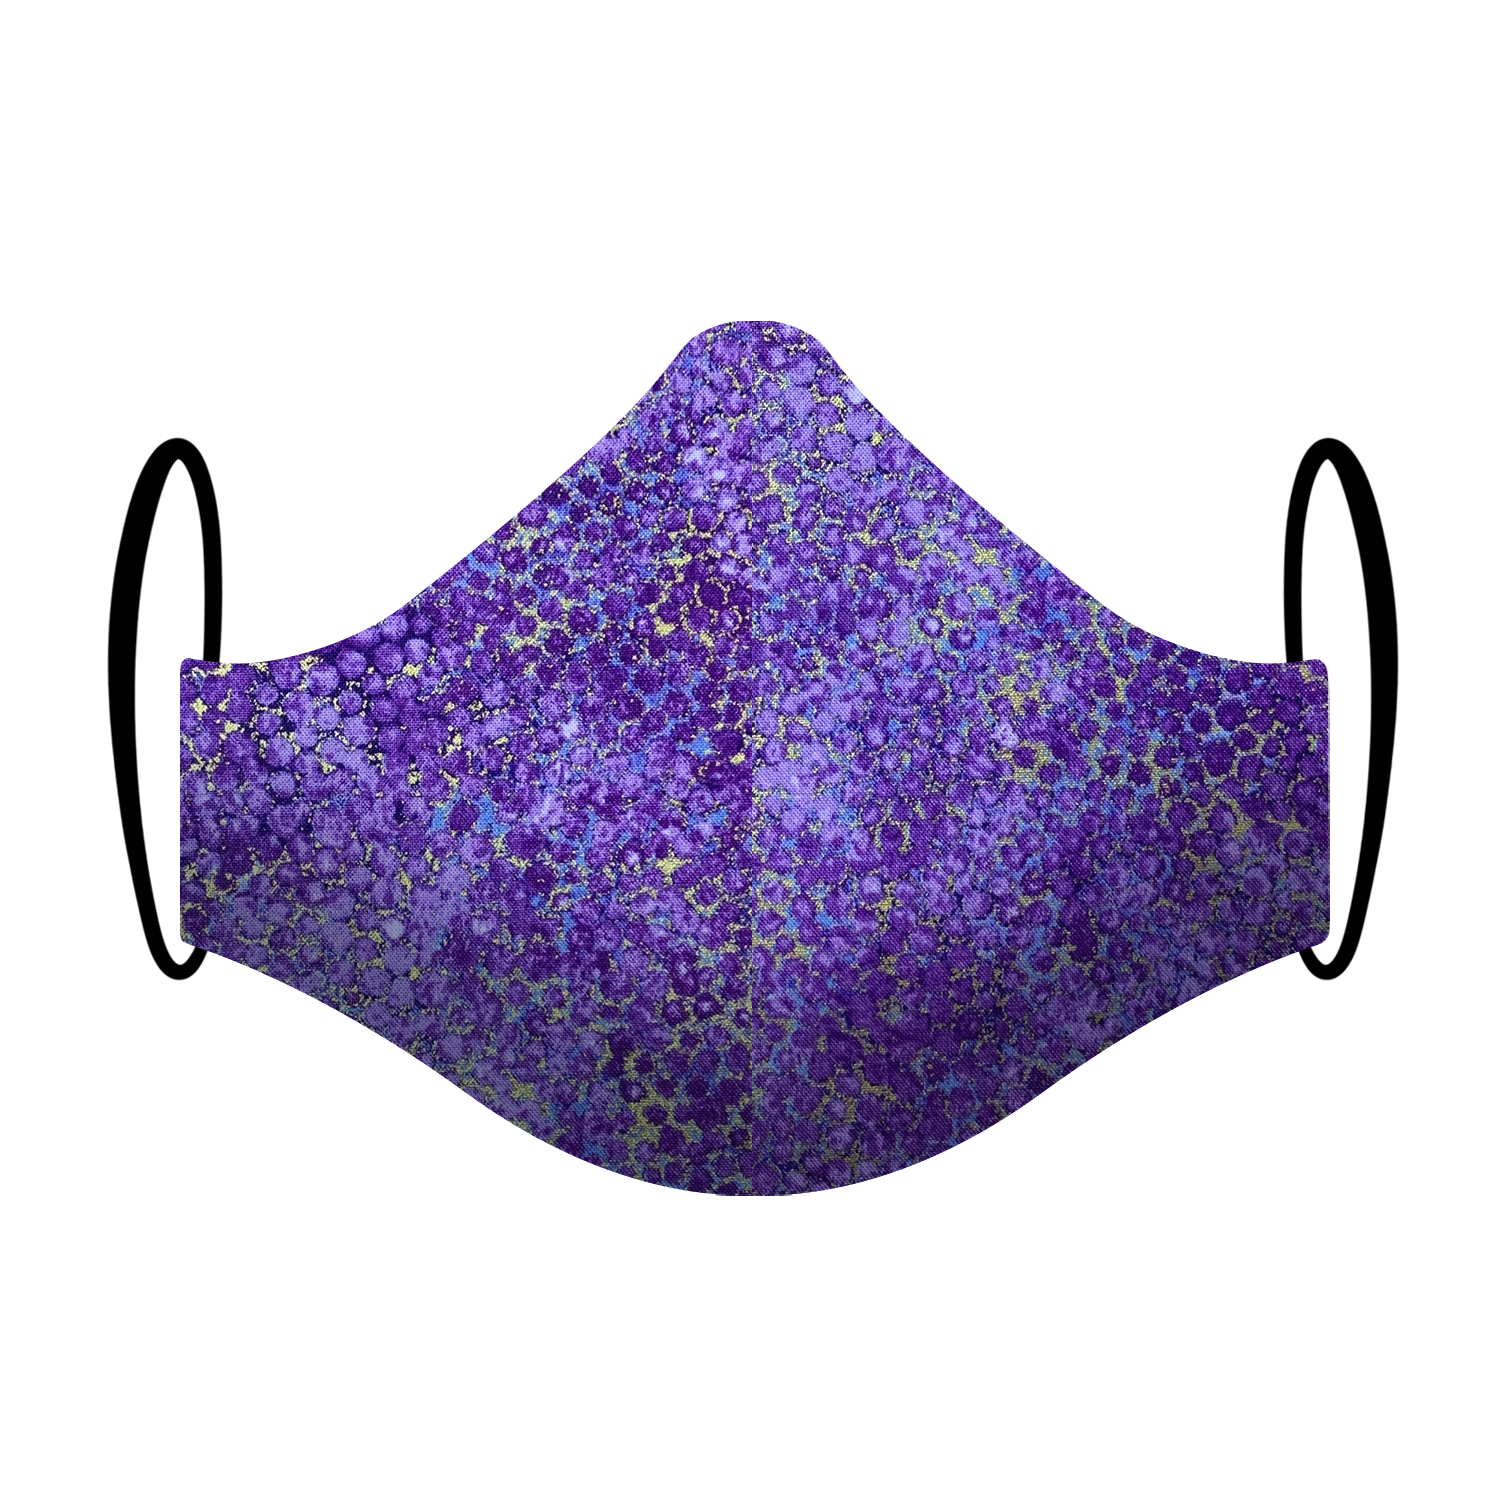 Triple layered face mask made in Melbourne Australia from cotton and poplin featuring a unique shiny glimmering lavender print